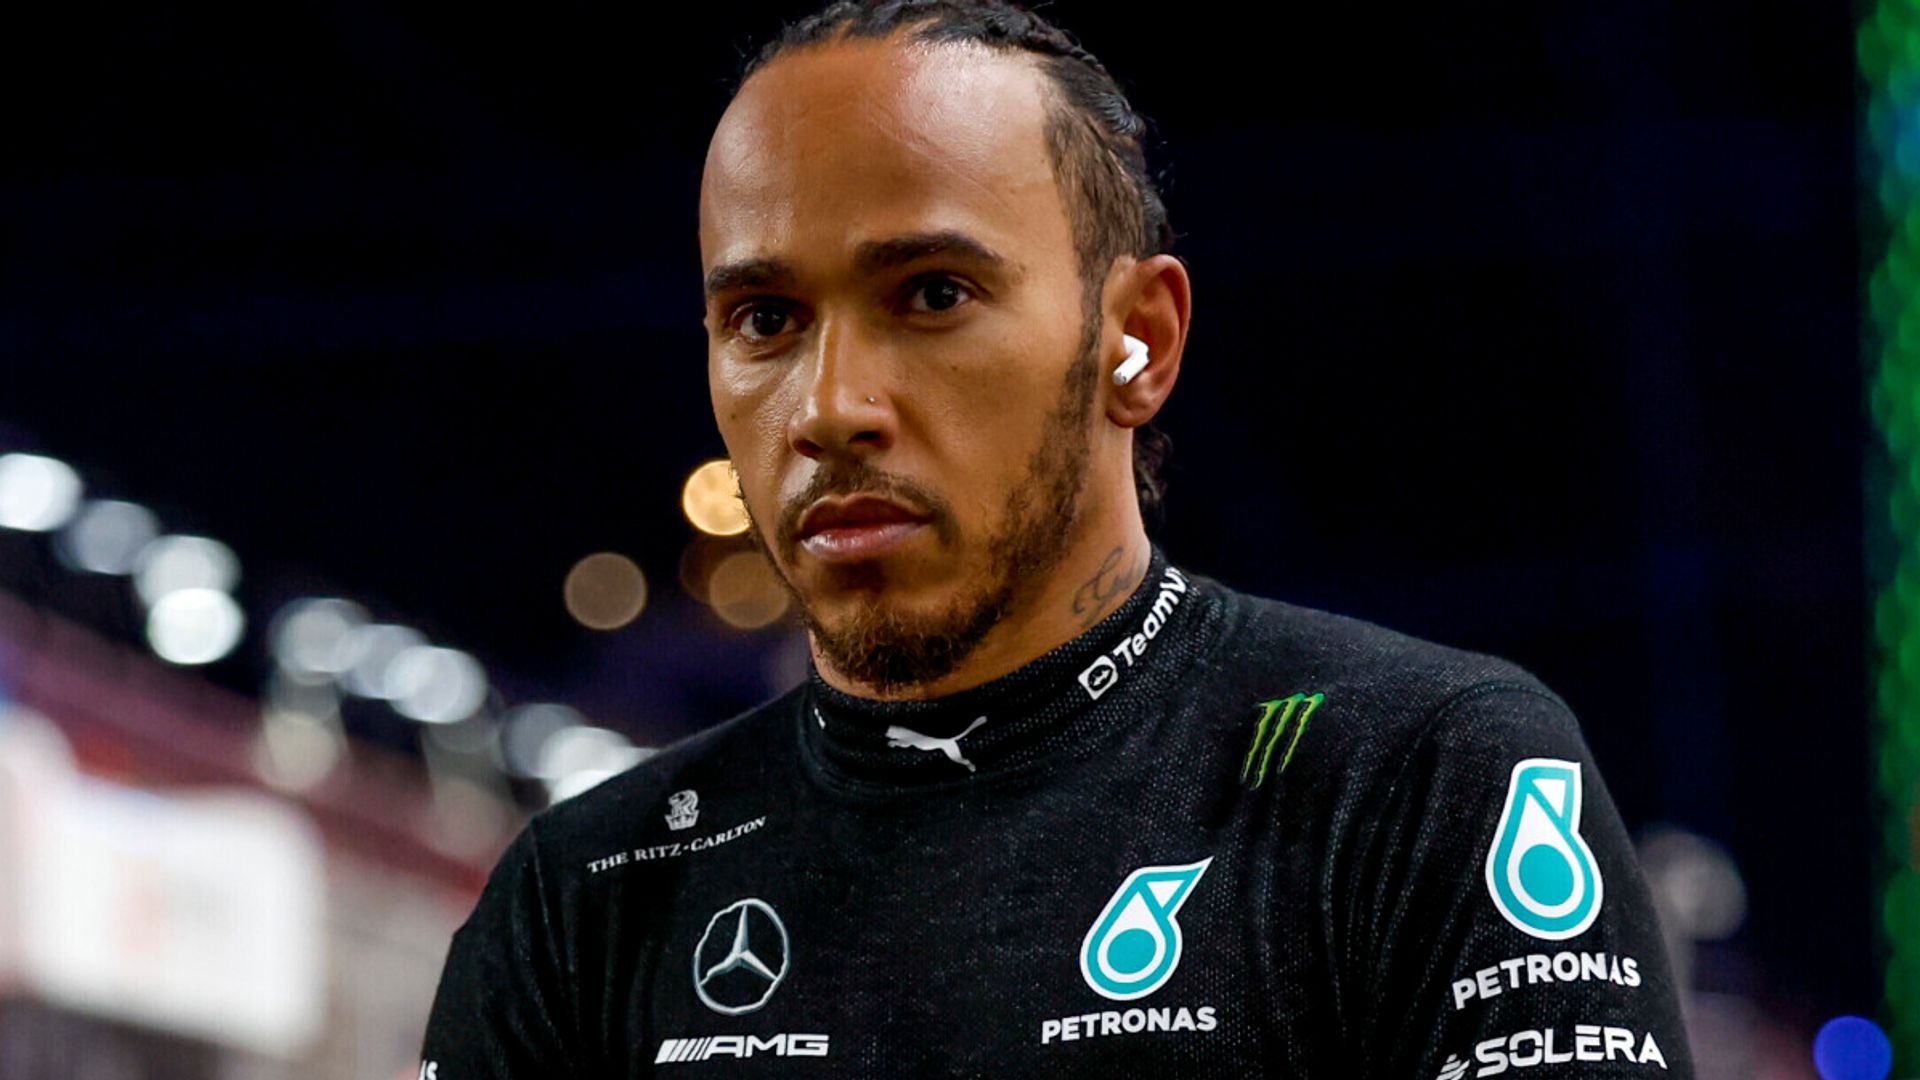 Hamilton: Red Bull sidepods might make Mercedes slower